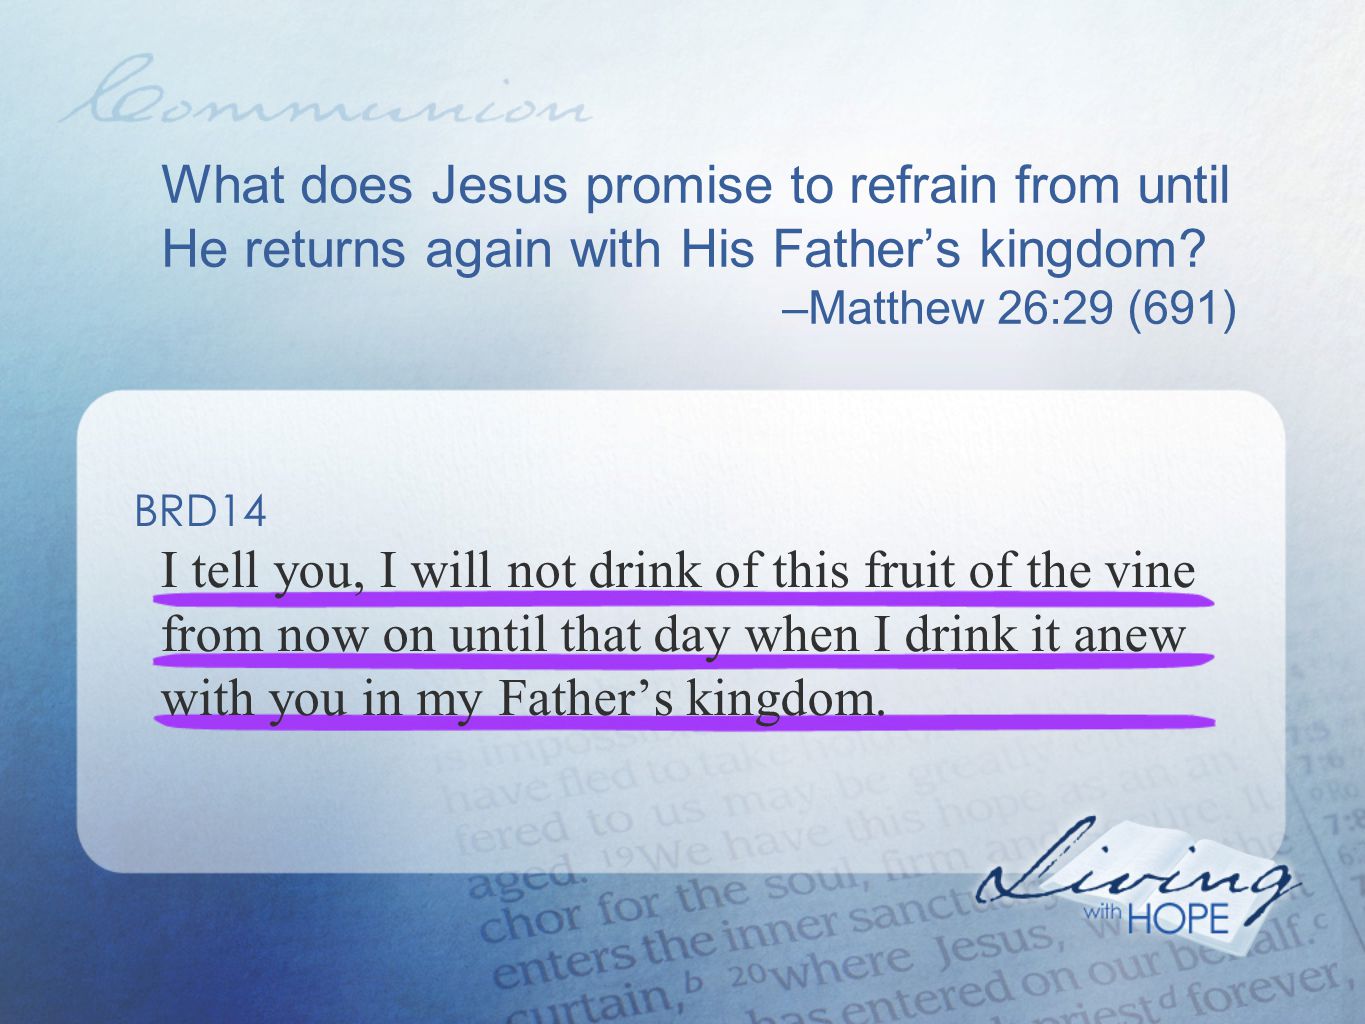 What does Jesus promise to refrain from until He returns again with His Father’s kingdom